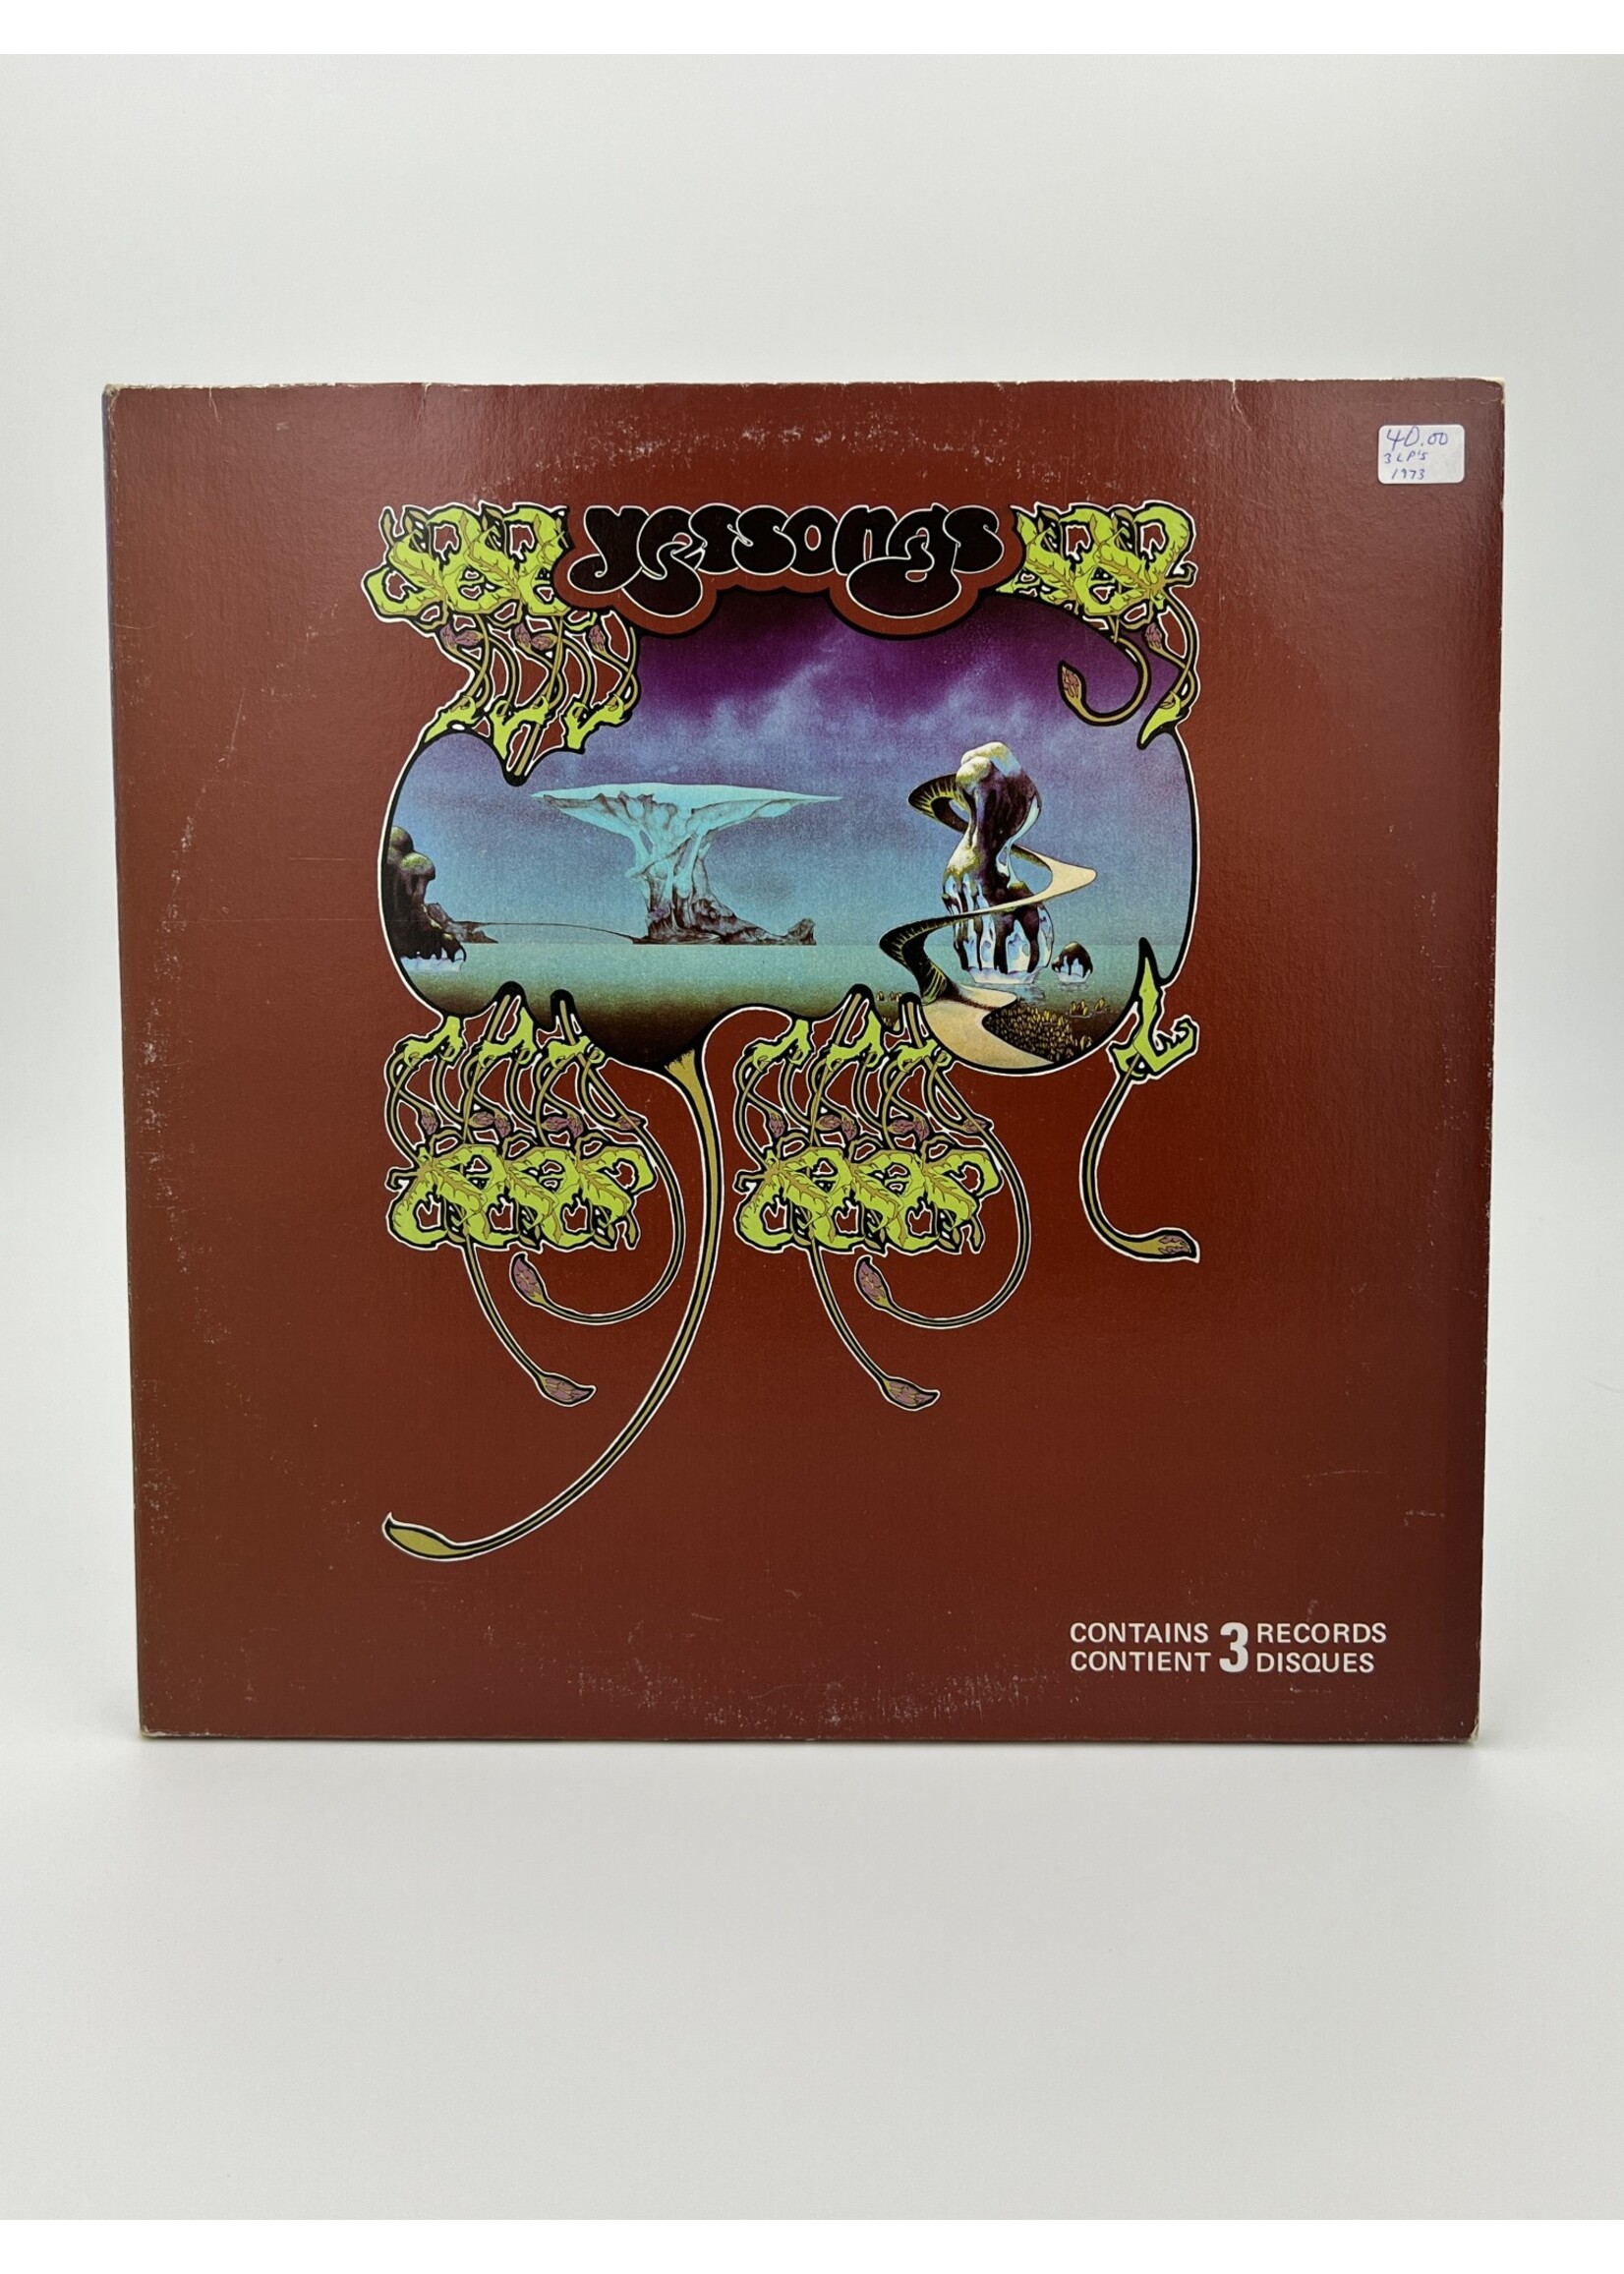 LP   Yes Yessongs 3 LP Record